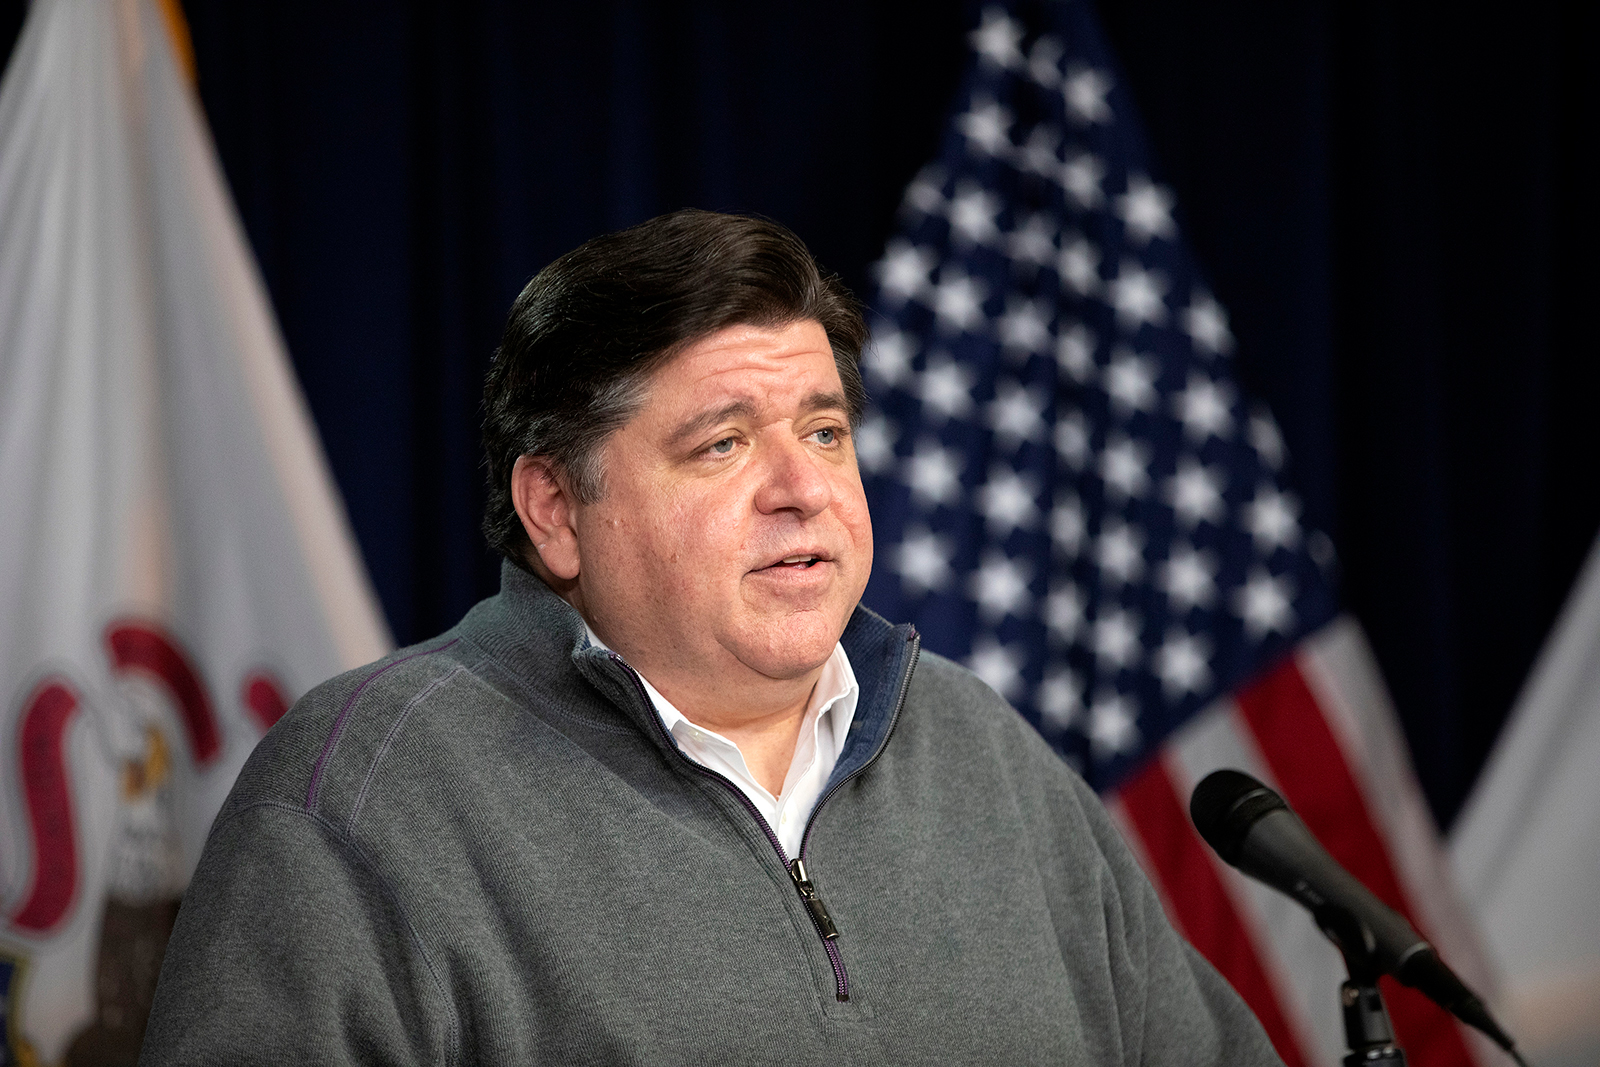 Illinois Gov. J.B. Pritzker speaks during a press briefing regarding the coronavirus pandemic on Sunday, May 3, in Chicago.